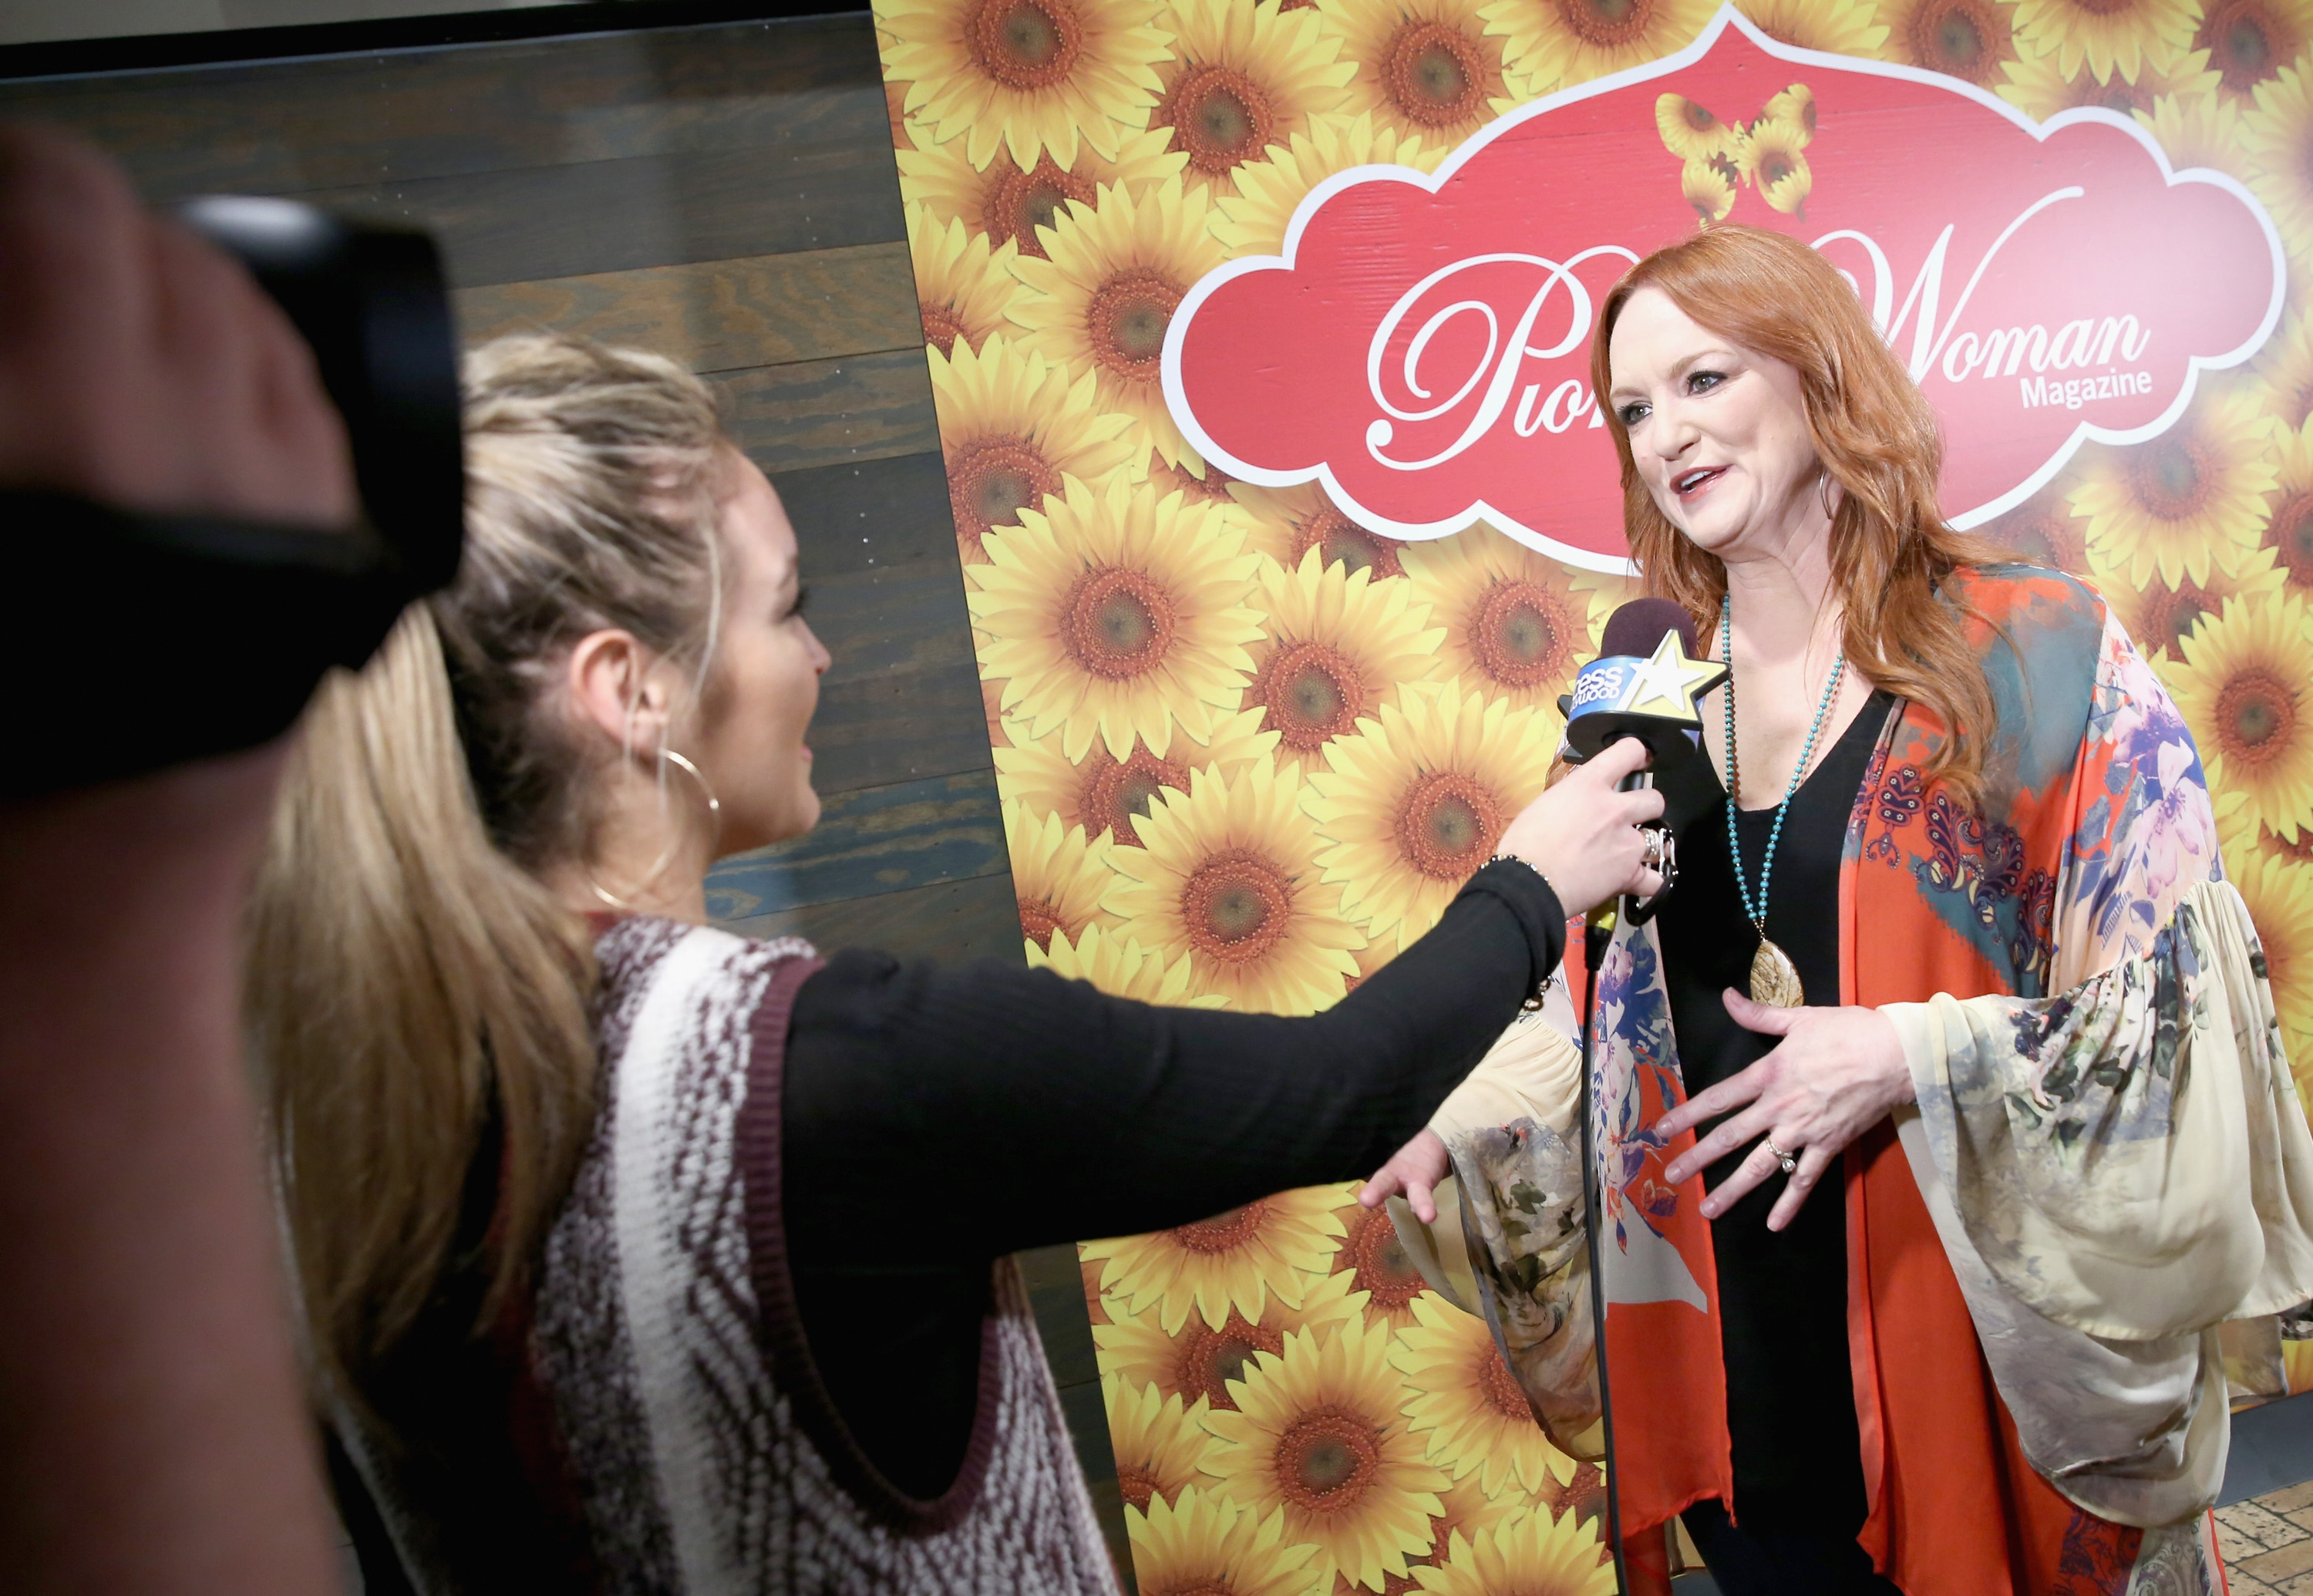 Ree Drummond giving an interview for Access Hollywood